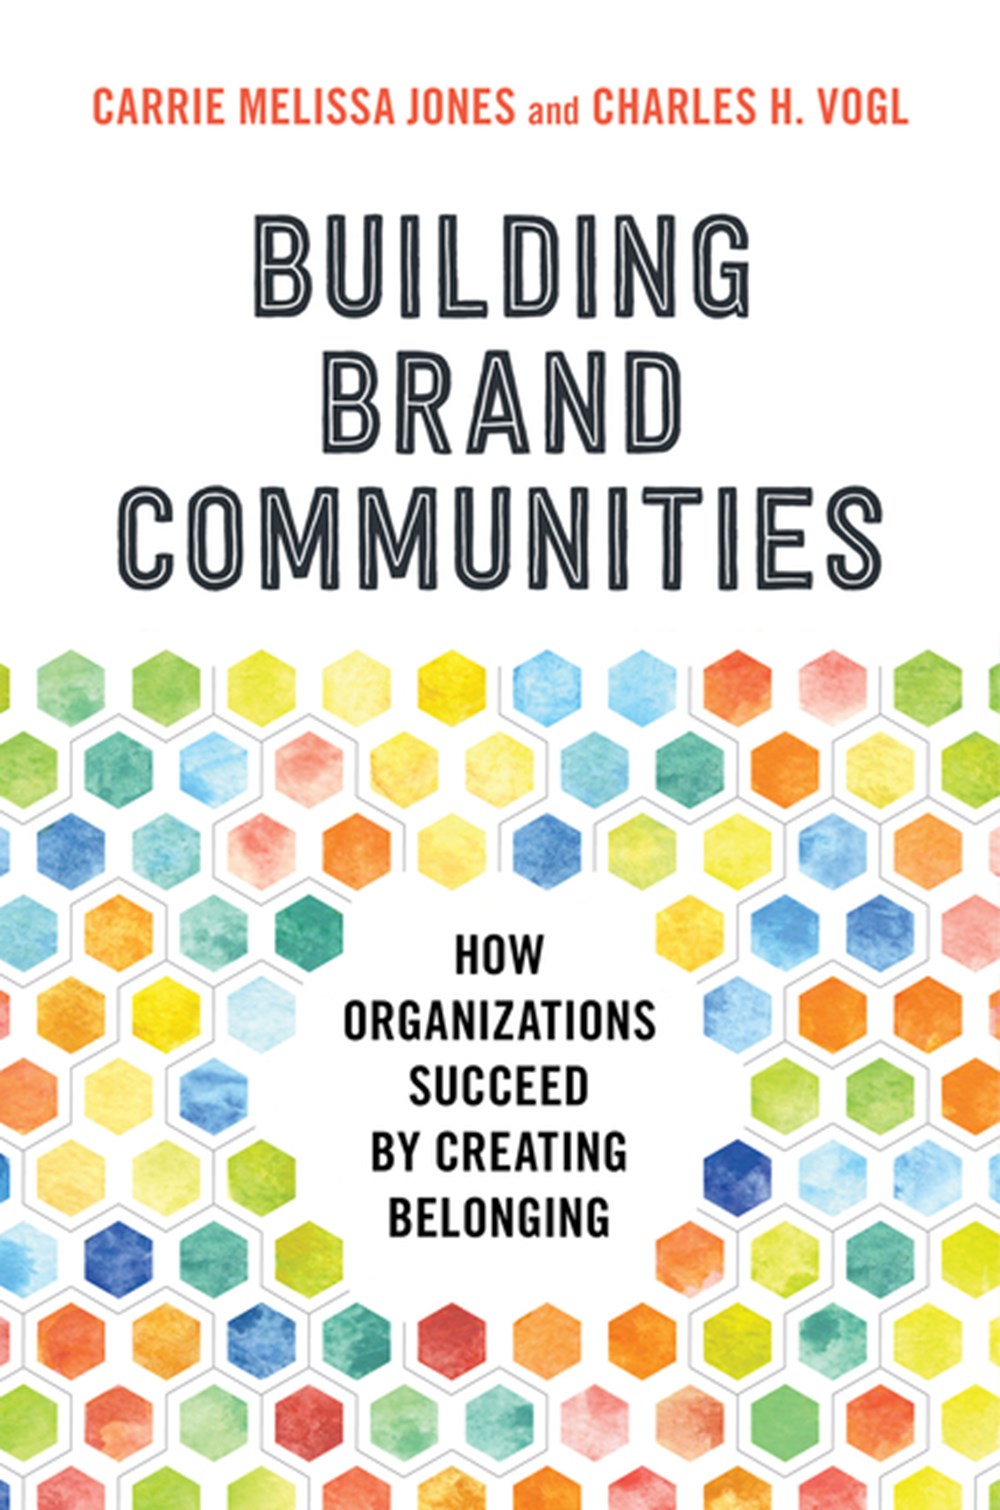 Building Brand Communities How Organizations Succeed by Creating Belonging